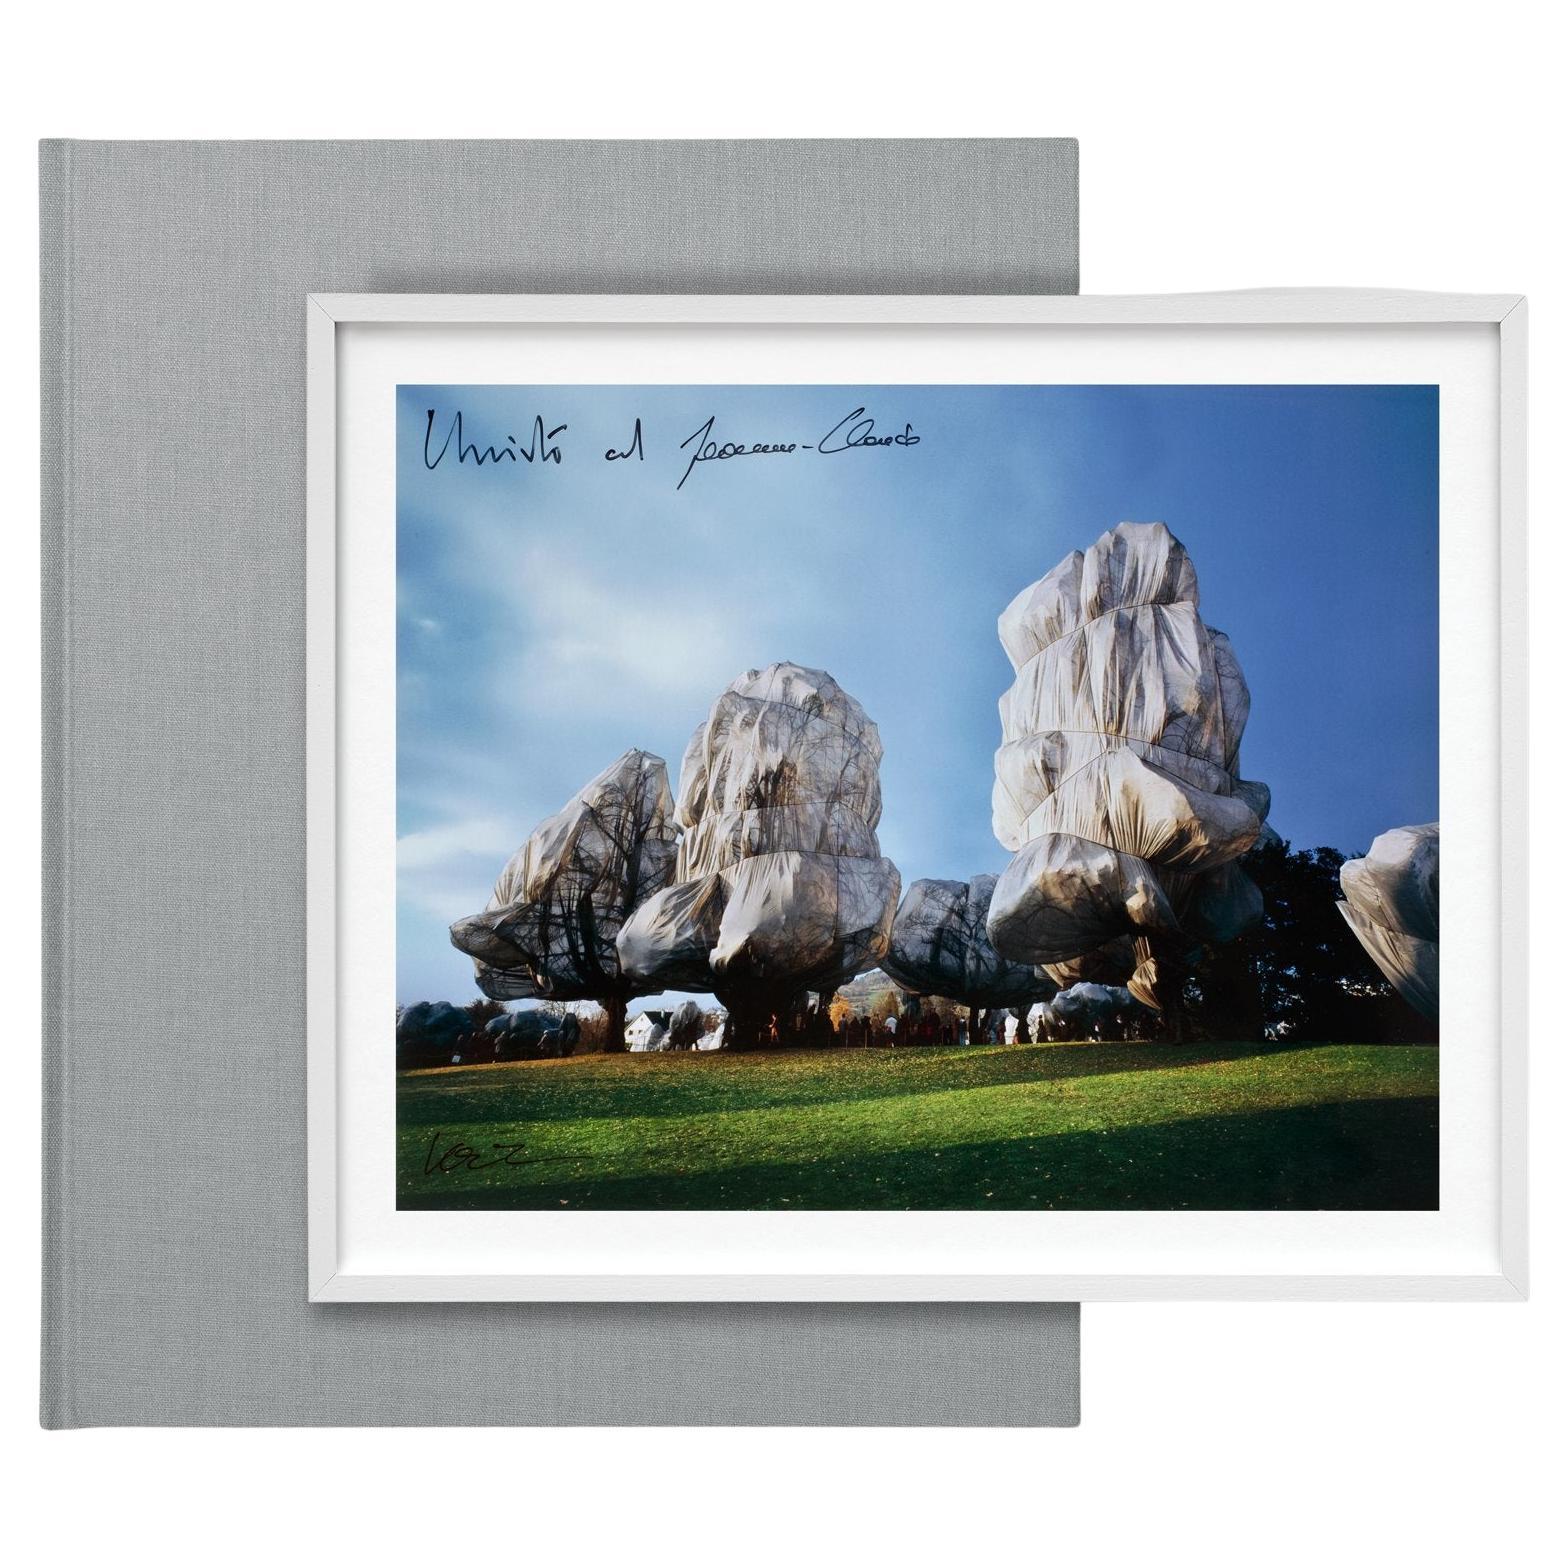 Christo and Jeanne-Claude. Wrapped Trees. Basel 1997–1998. Signed Book & Print